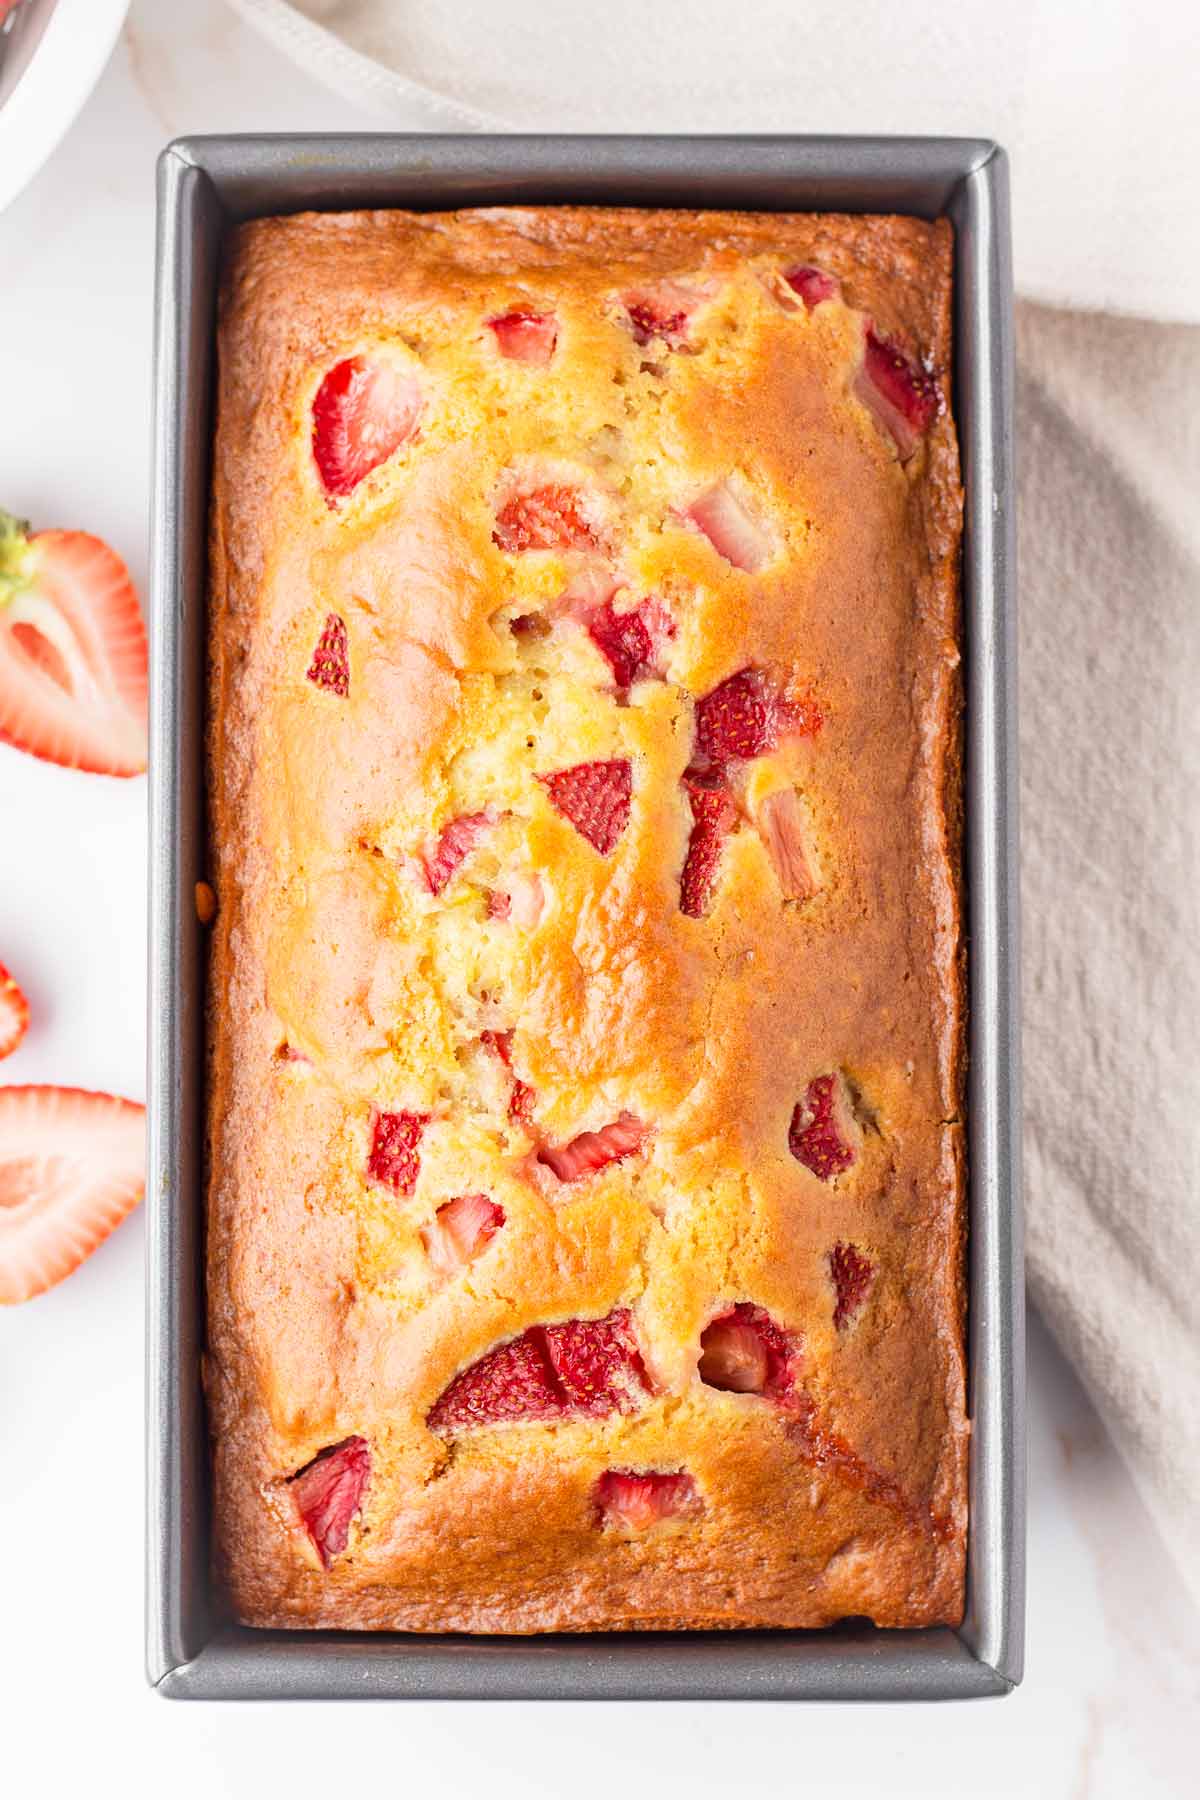 baked strawberry loaf in a baking pan